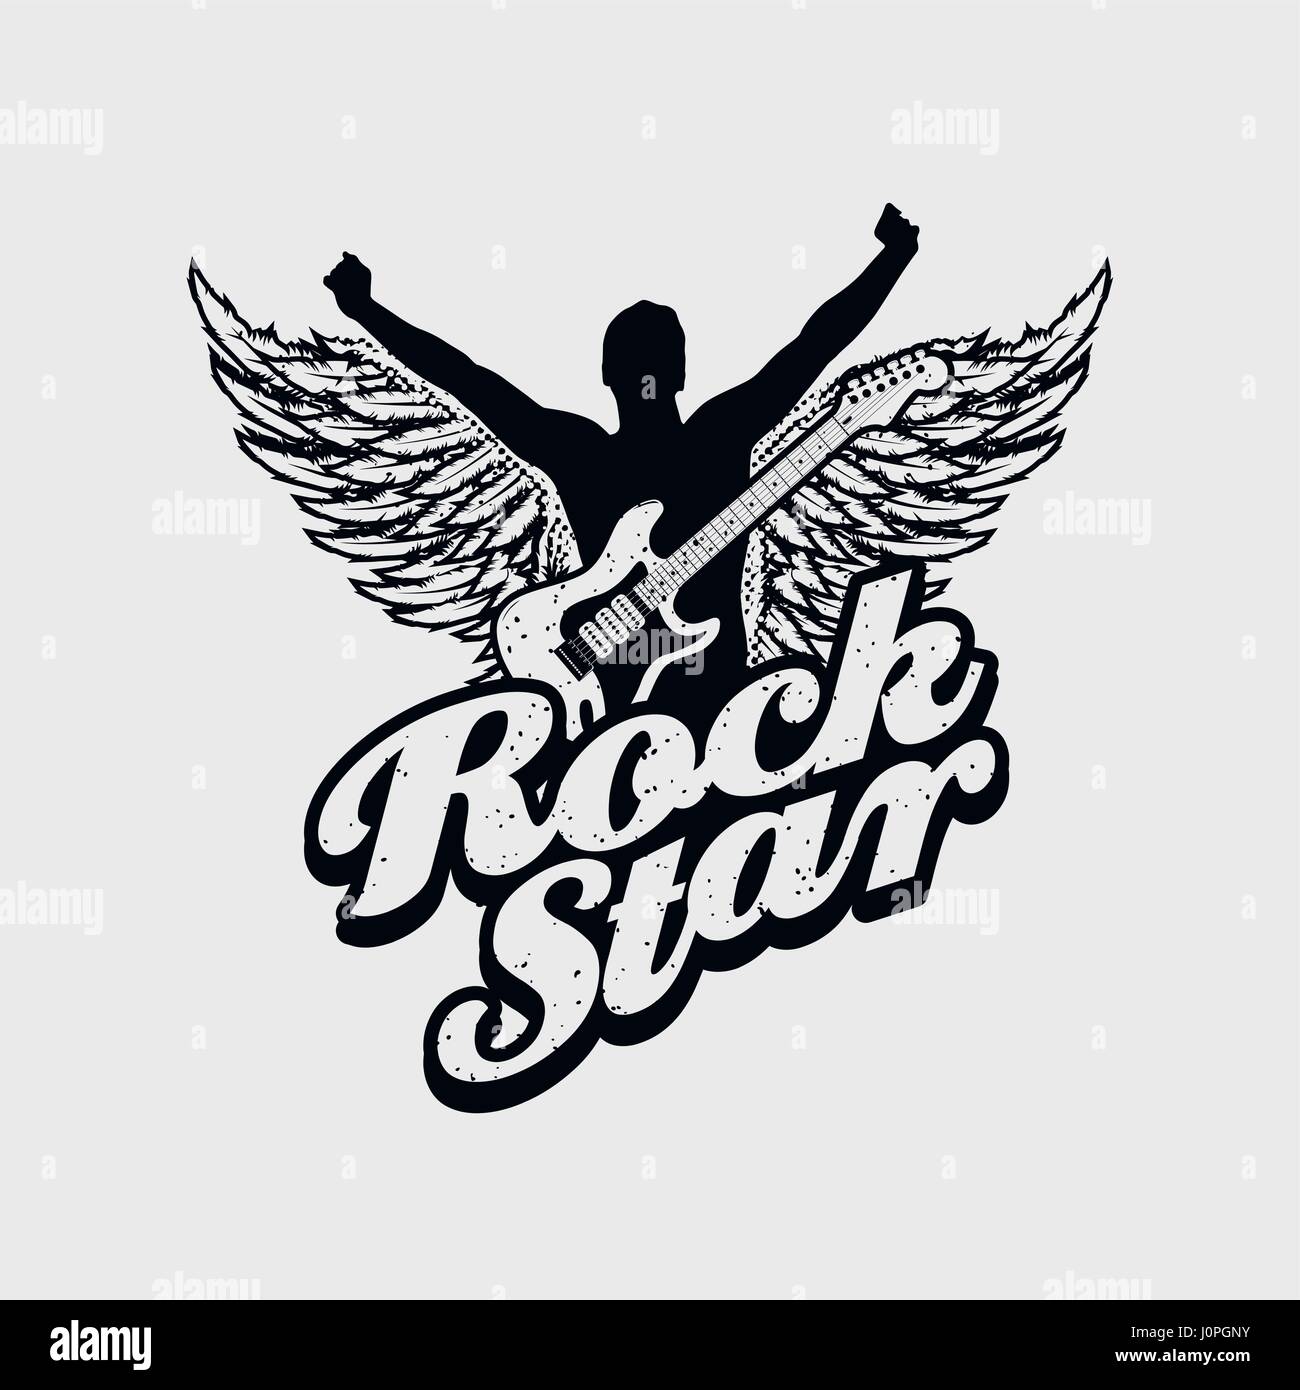 Rock Star Typographic Design For T Shirt Print Or All Graphic